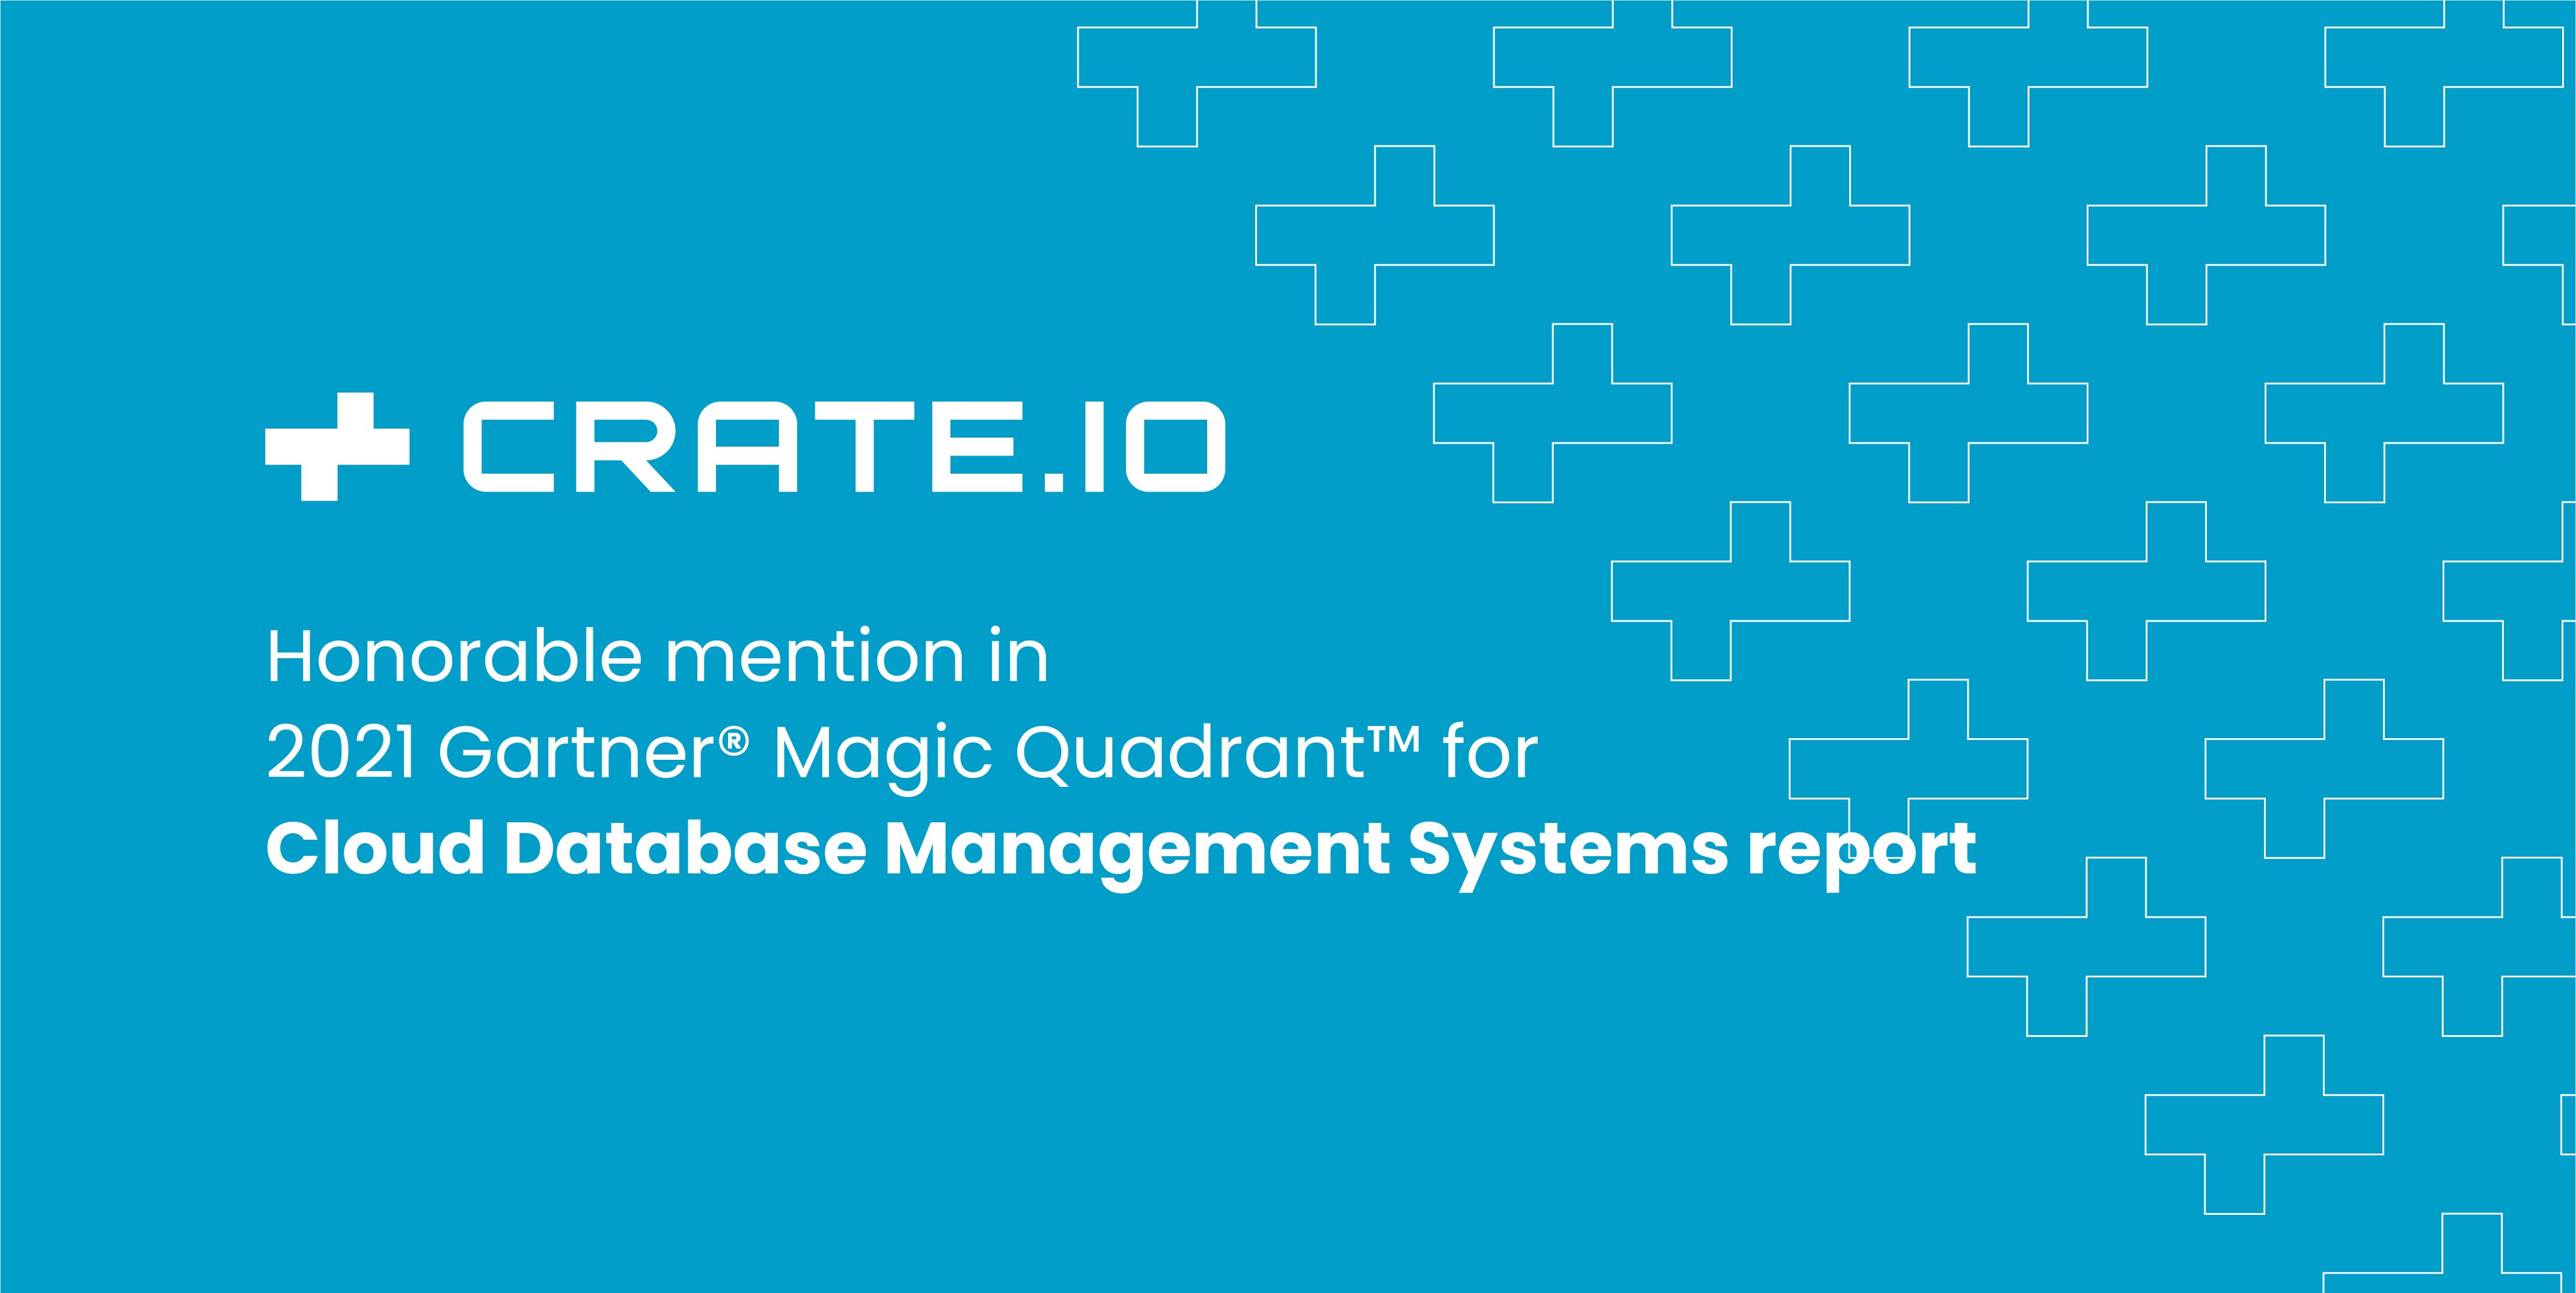 Honorable Mention in 2021 Gartner Magic Quadrant for Cloud Database Management Systems report